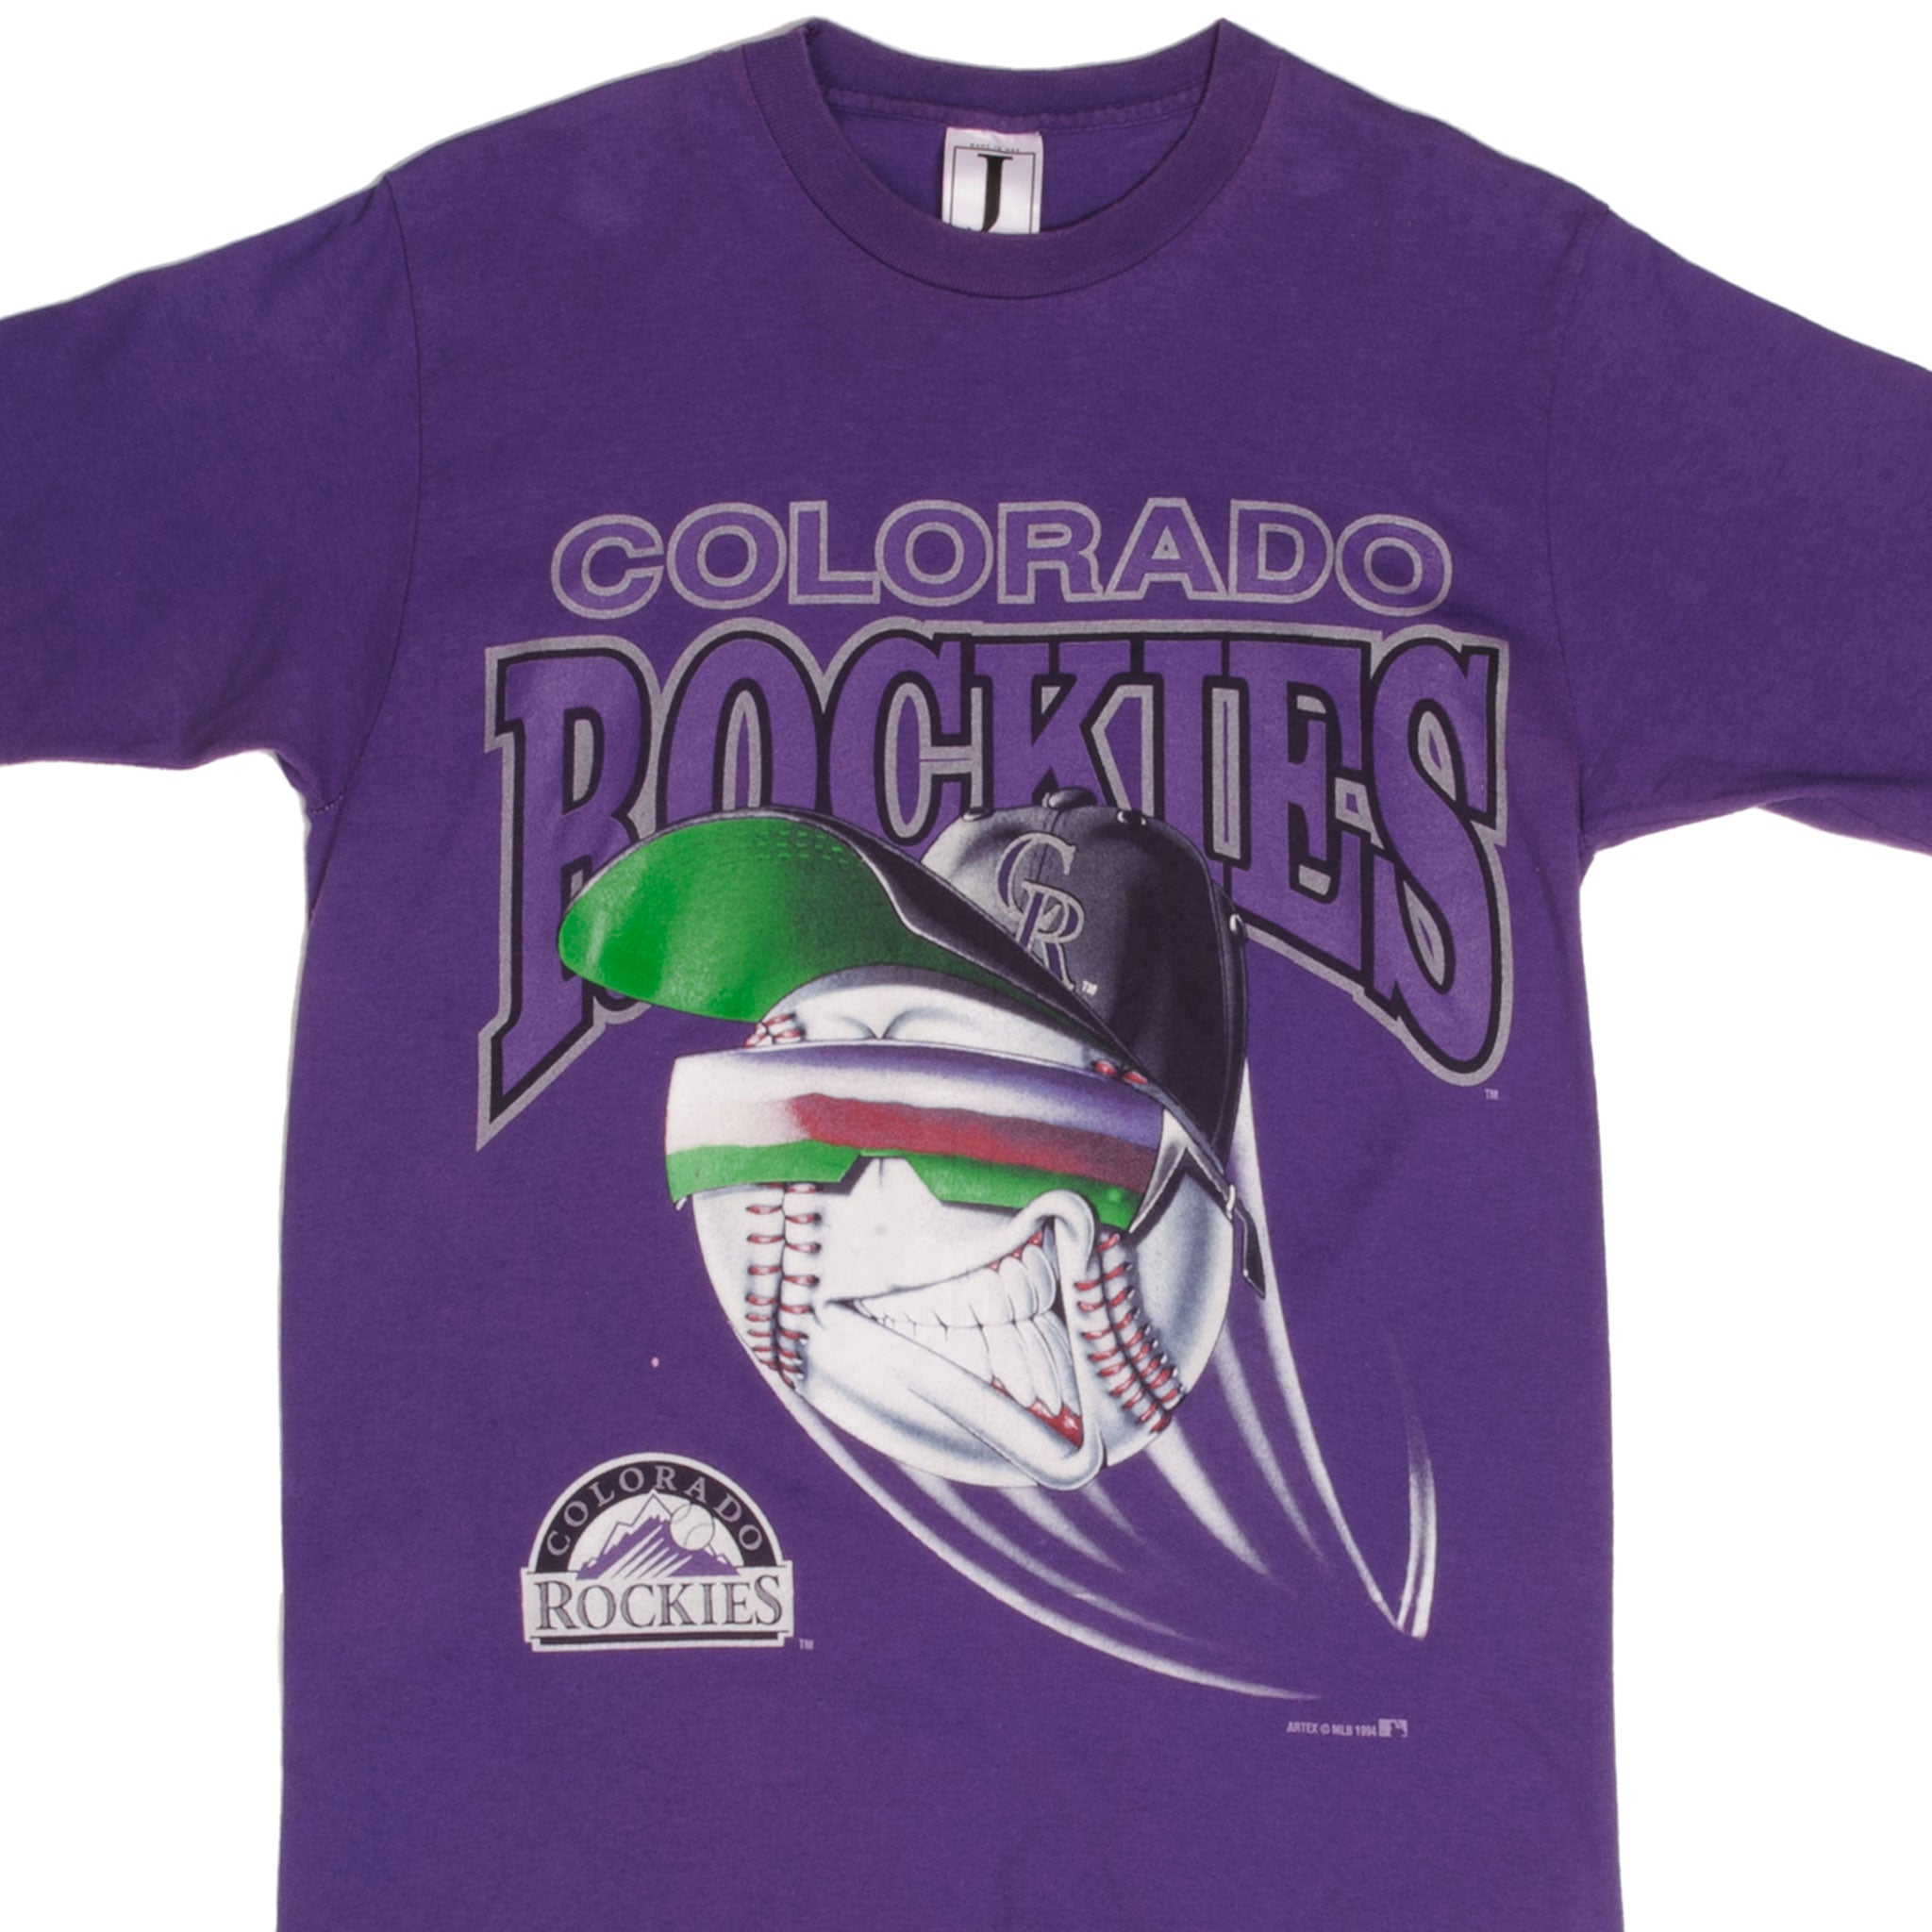 1994 COLORADO ROCKIES Made in USA Size XL Vintage T-Shirt / E8185T –  FISHTALE VINTAGE